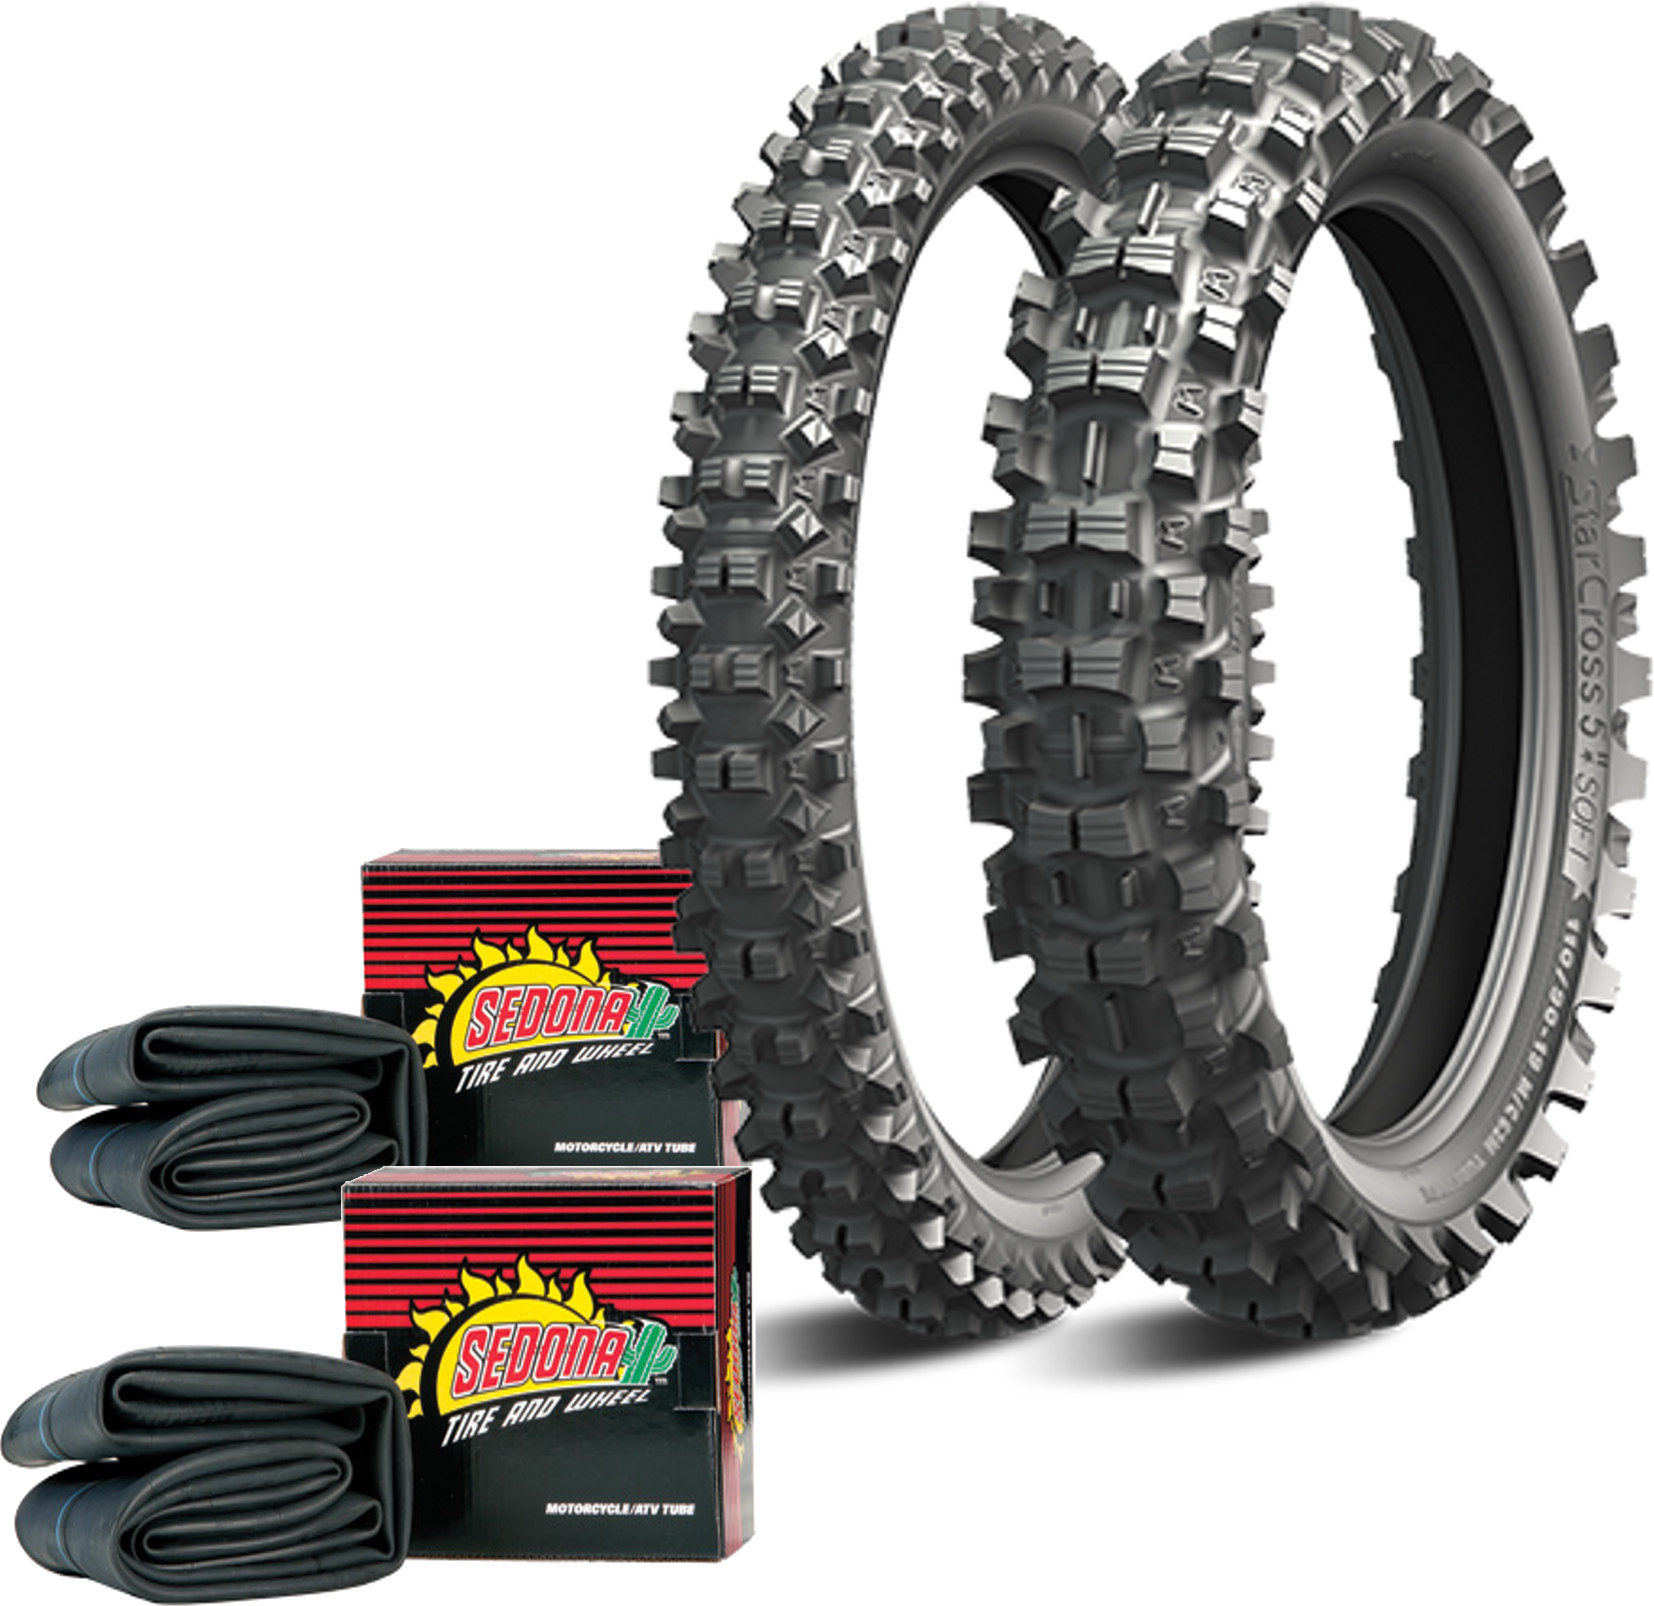 Starcross 5 Soft 120/80-19 90/100-21 - Dirt Tire Kit w/ Tubes - Click Image to Close